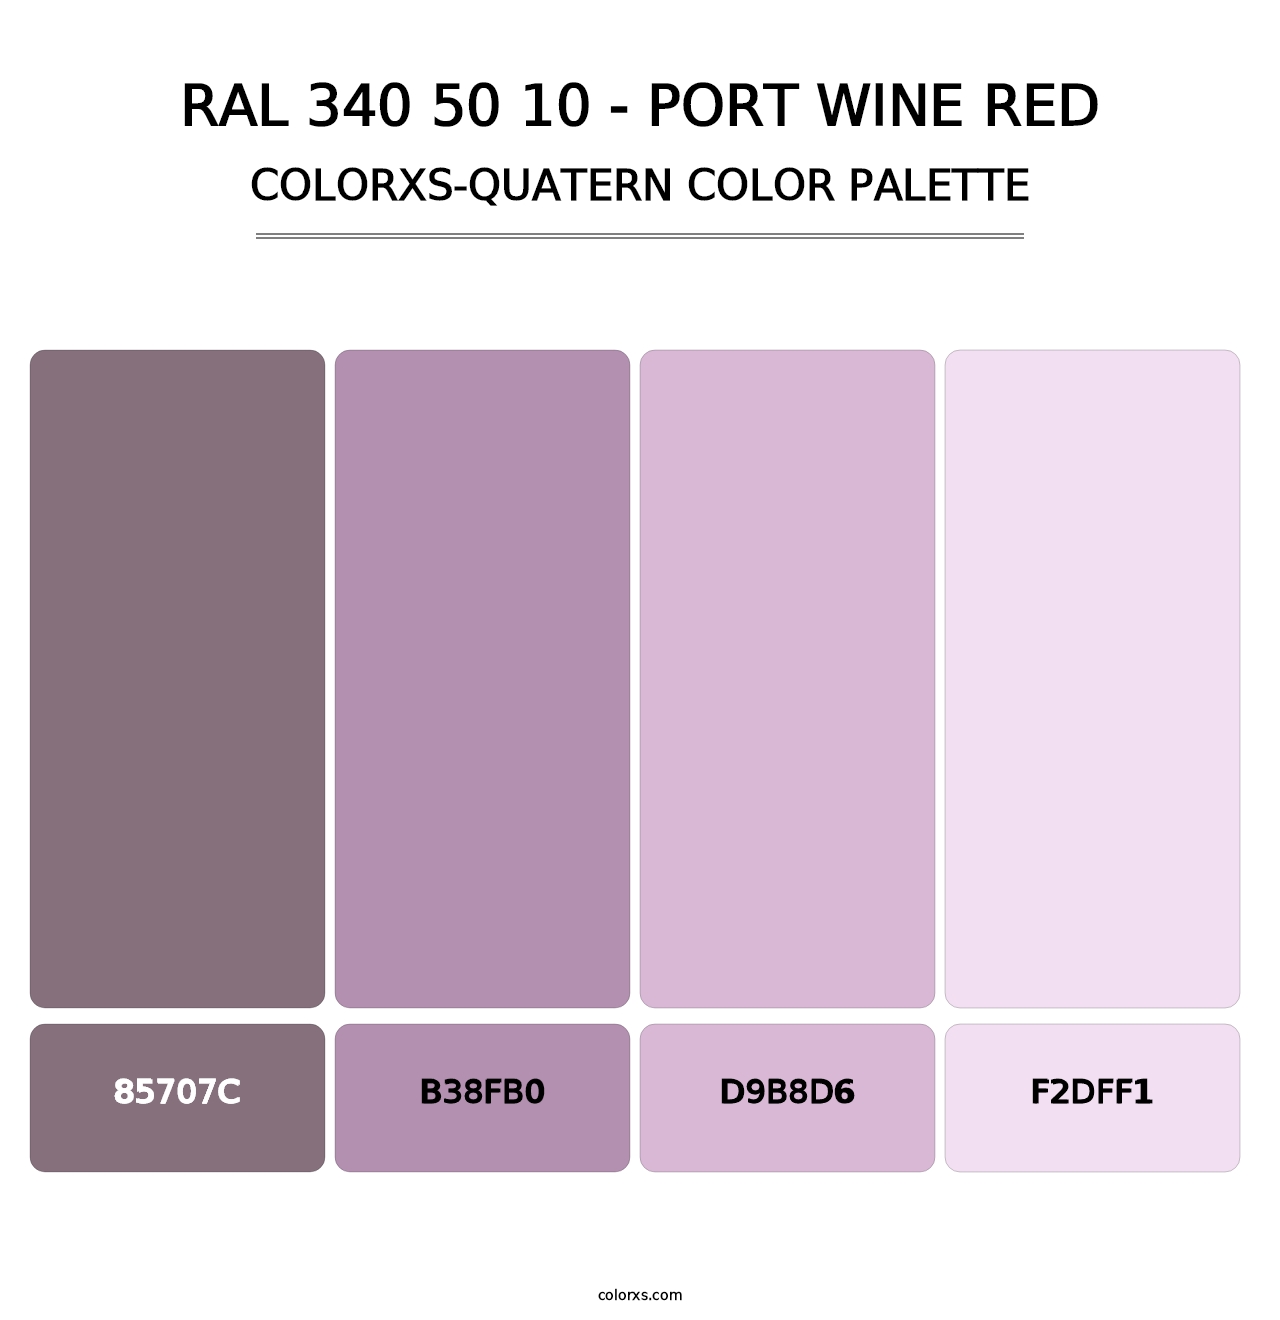 RAL 340 50 10 - Port Wine Red - Colorxs Quatern Palette